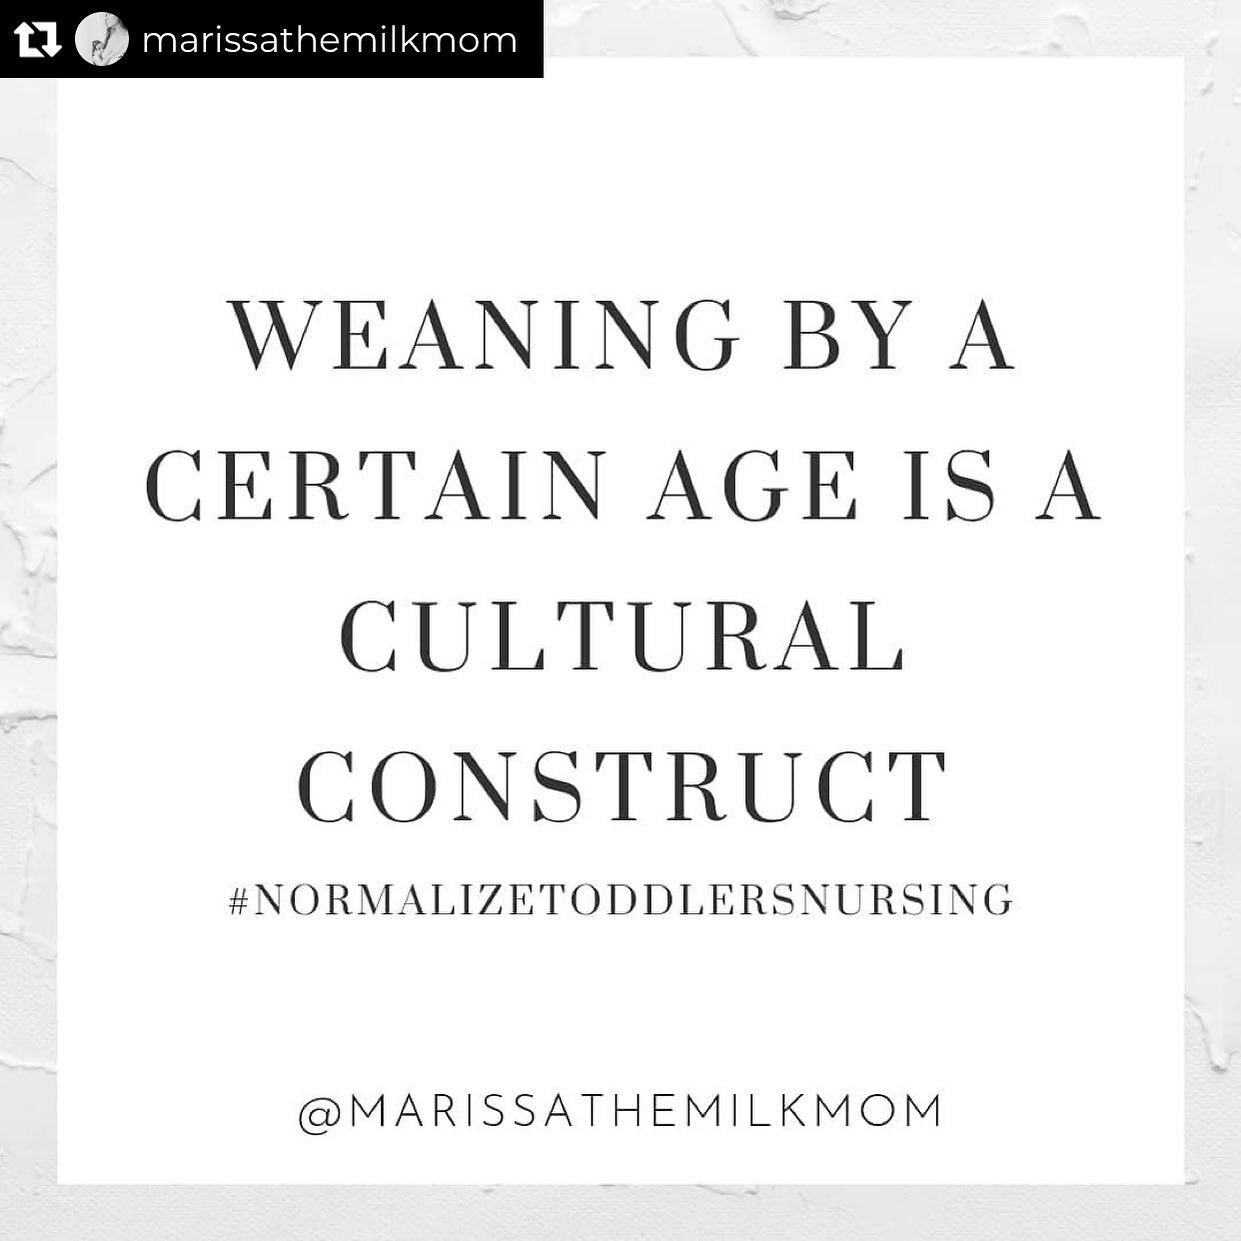 Repost from @marissathemilkmom
&bull;
Toddlers nursing. It seems to cause a lot of controversy when it shouldn't.⠀
⠀
And a lot of women are hiding in their houses nursing their toddlers because they're afraid of the stigma that society has put on the